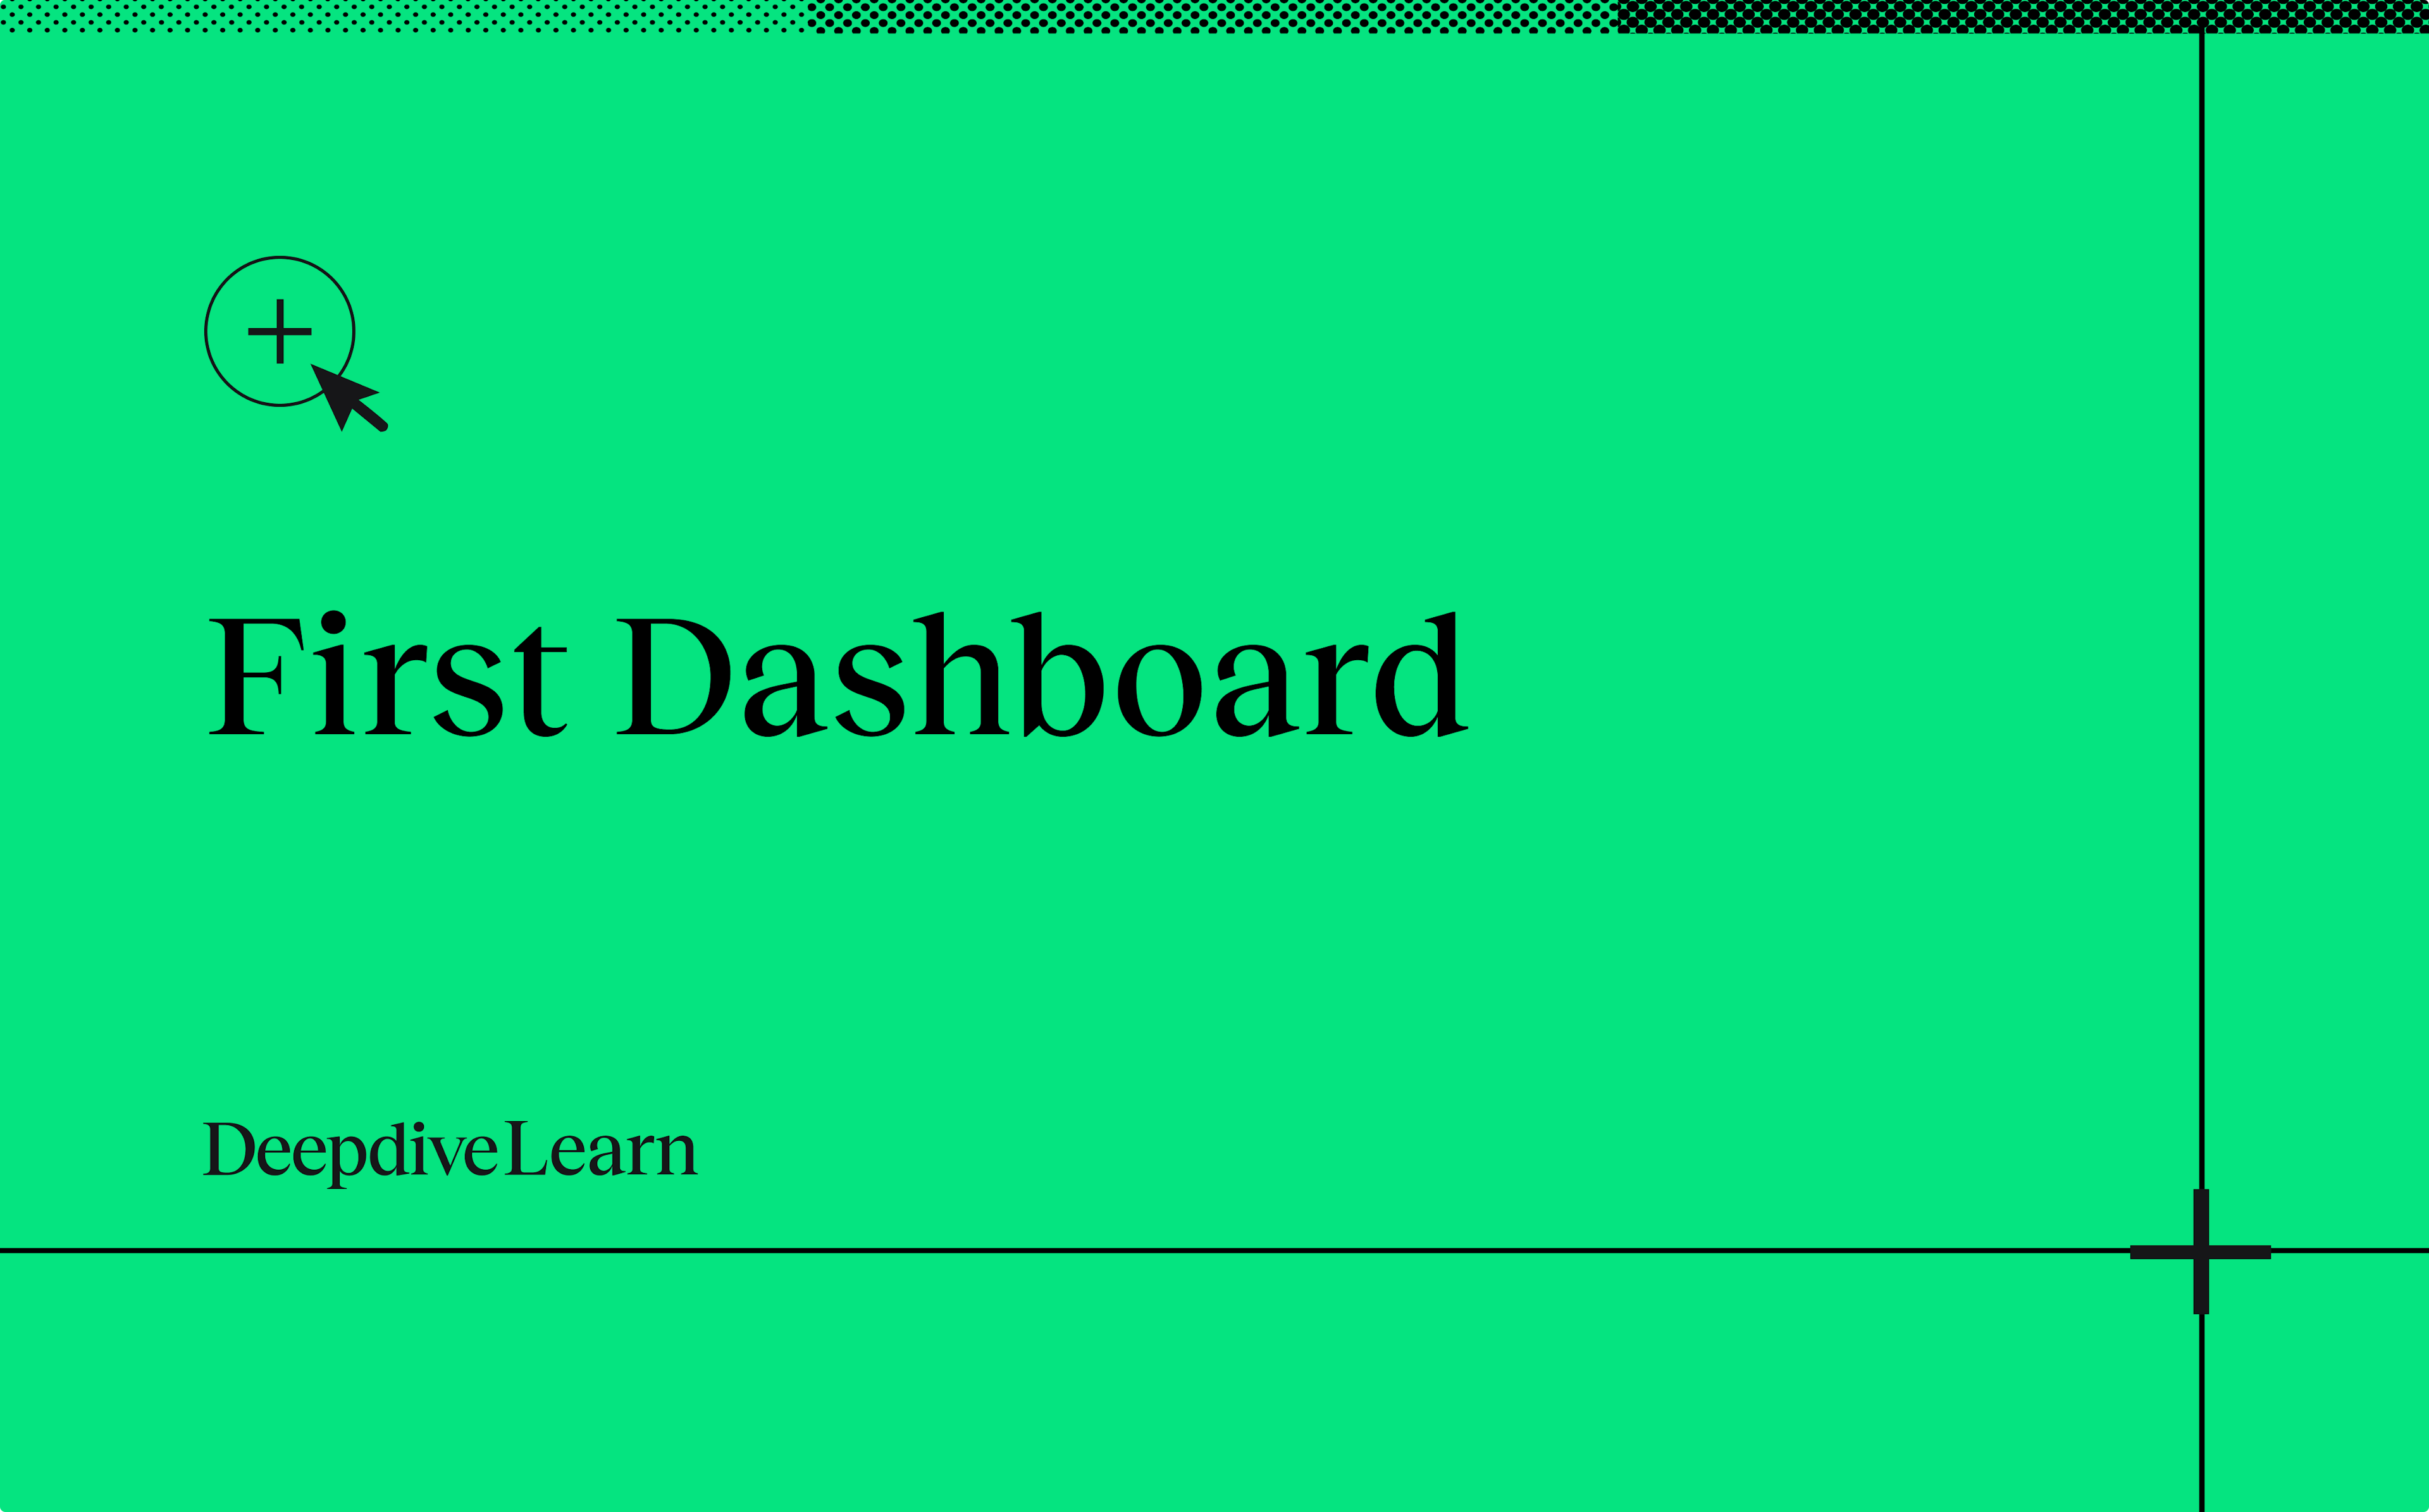 First dashboard by Deepdive Learn